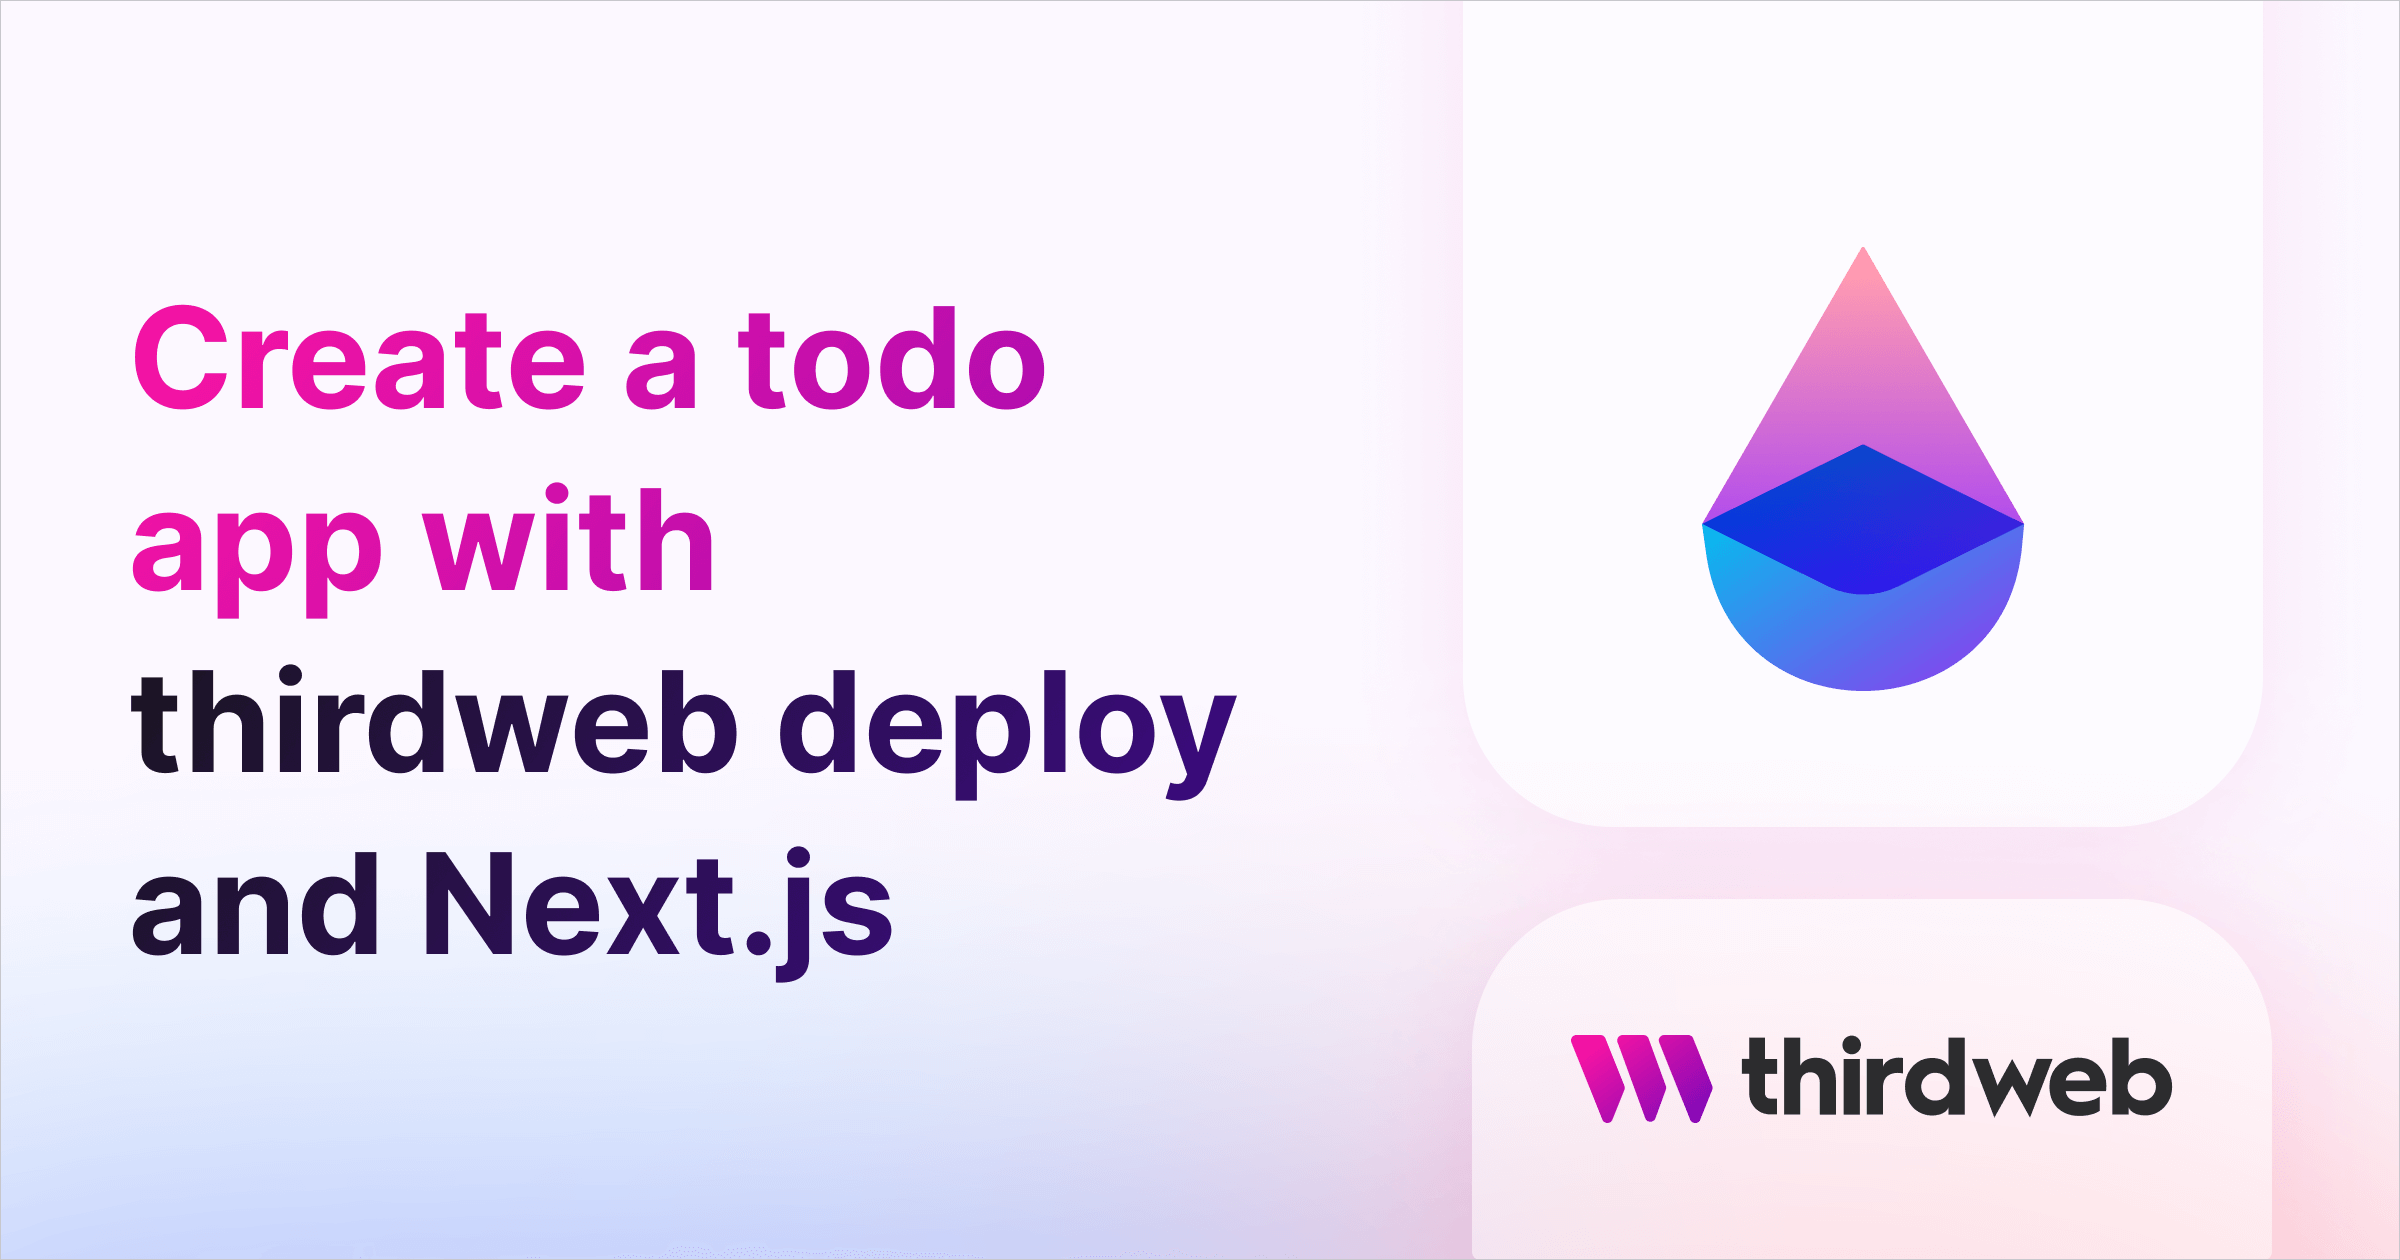 Create a todo app with thirdweb deploy and Next.js - thirdweb Guides